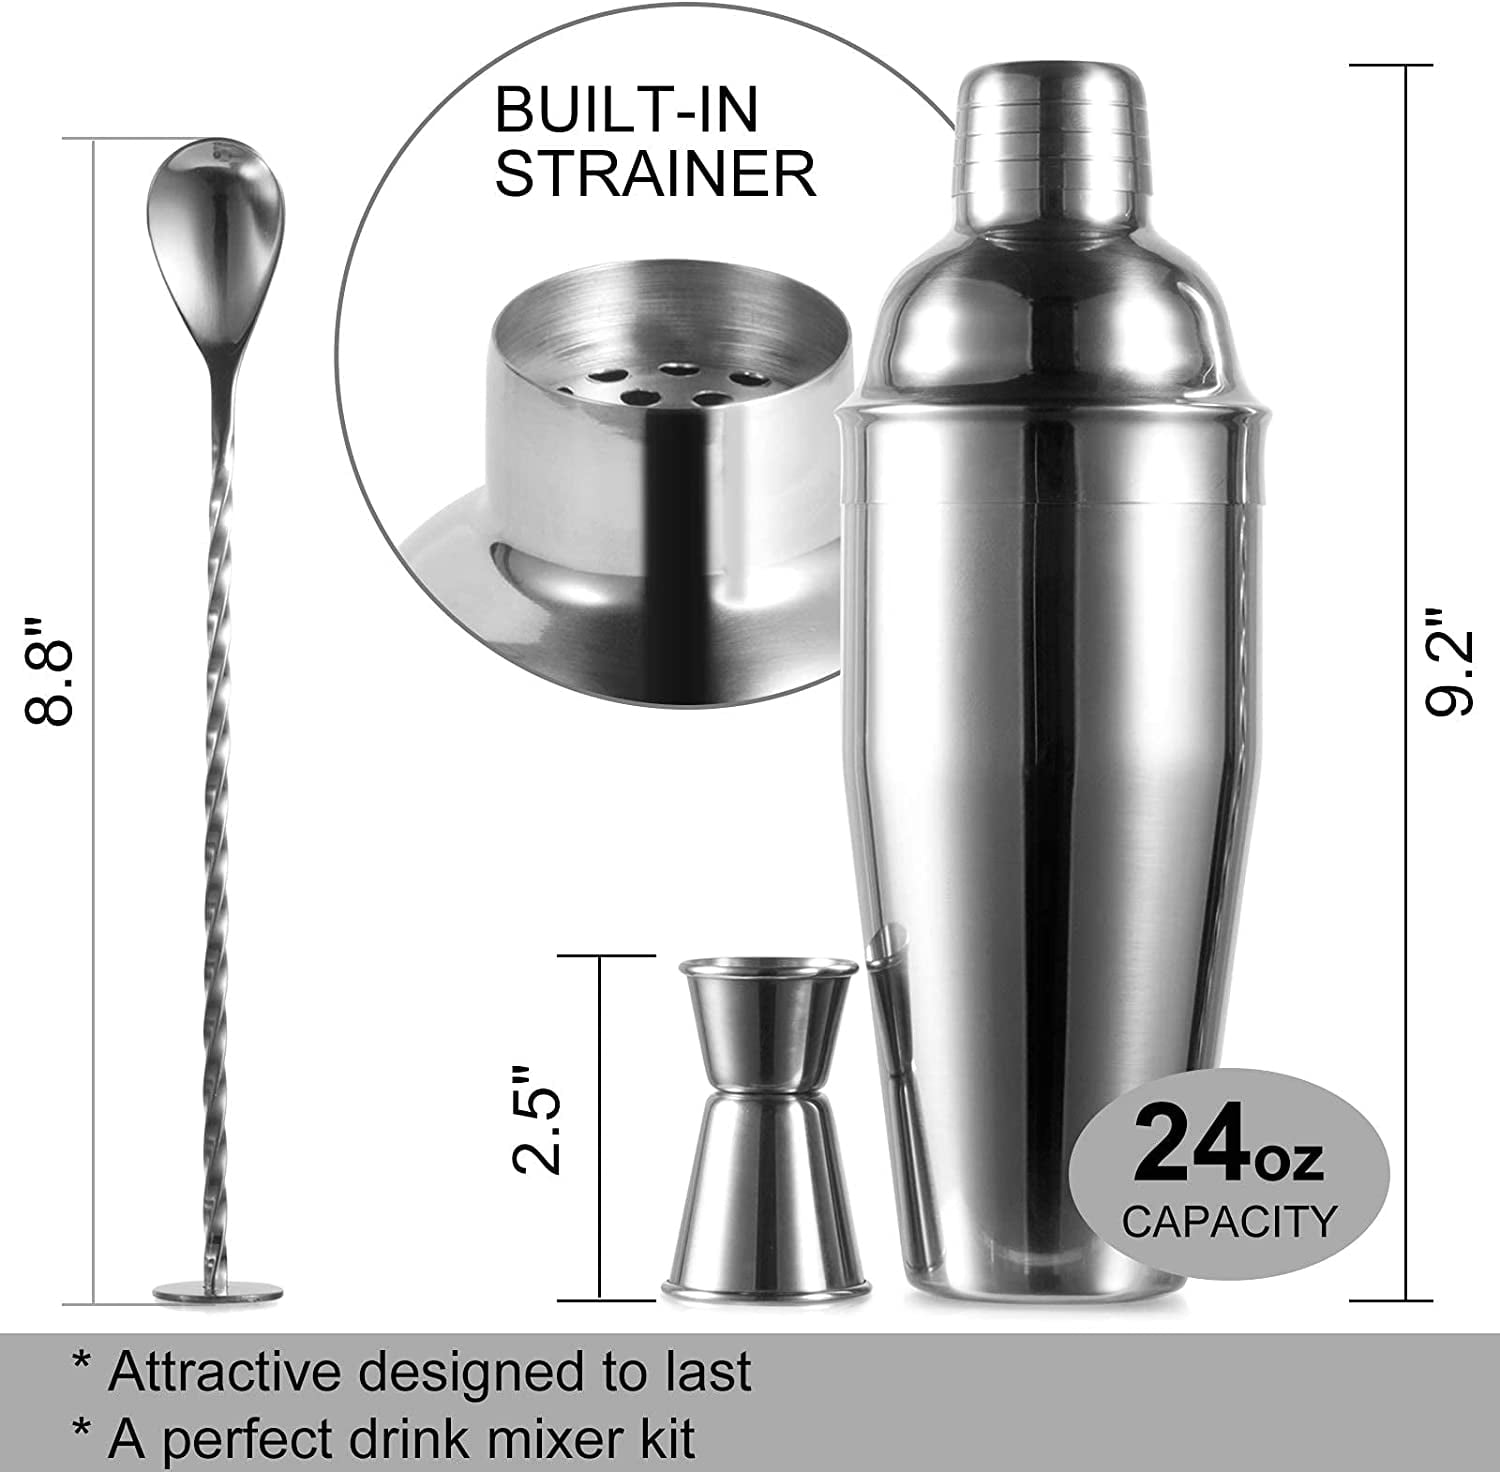 Arora 21oz Double Wall Stainless Steel Cocktail Shaker with Insulated Design and Built-in Strainer,Margarita Mixer Drink Shaker for Bartending Home